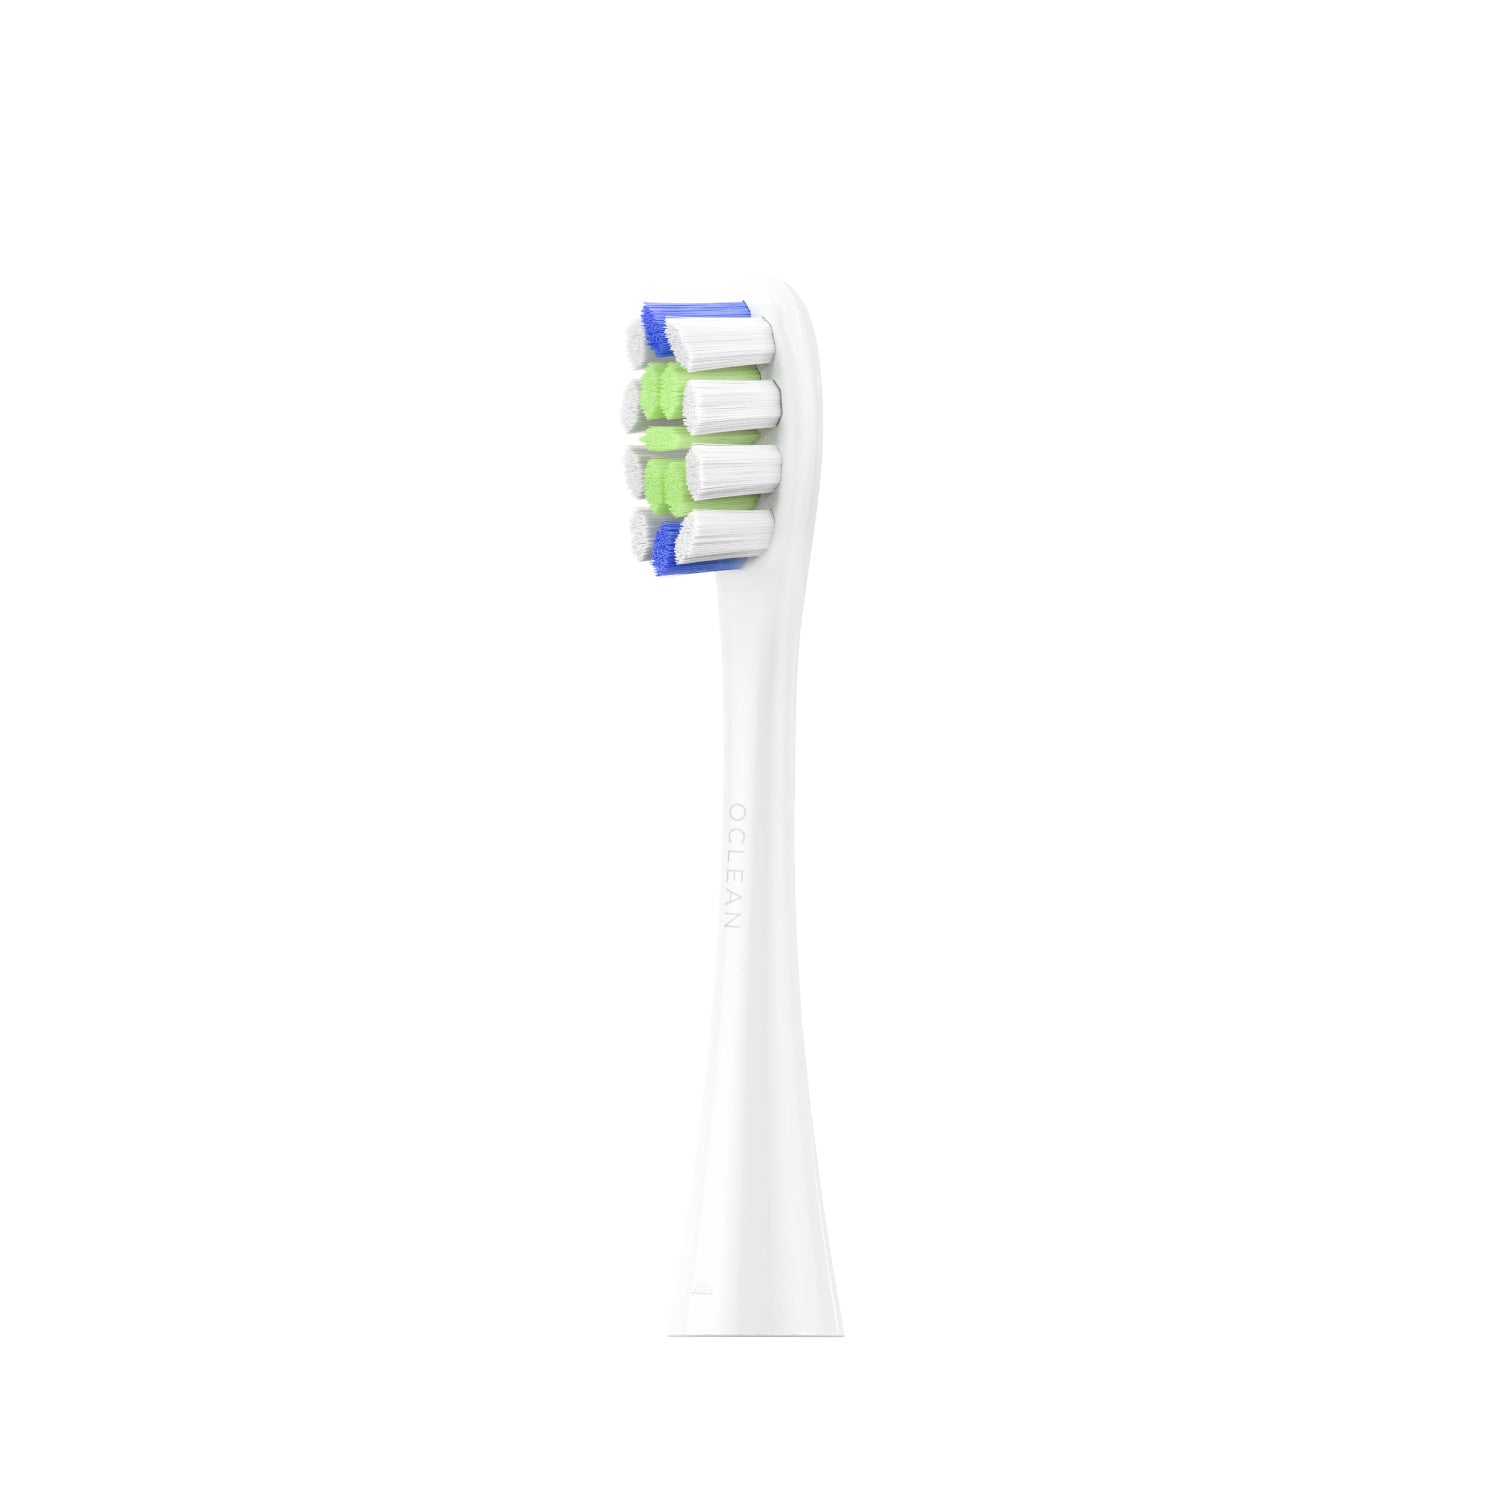 Oclean Replacement Brush for Electric Toothbrush